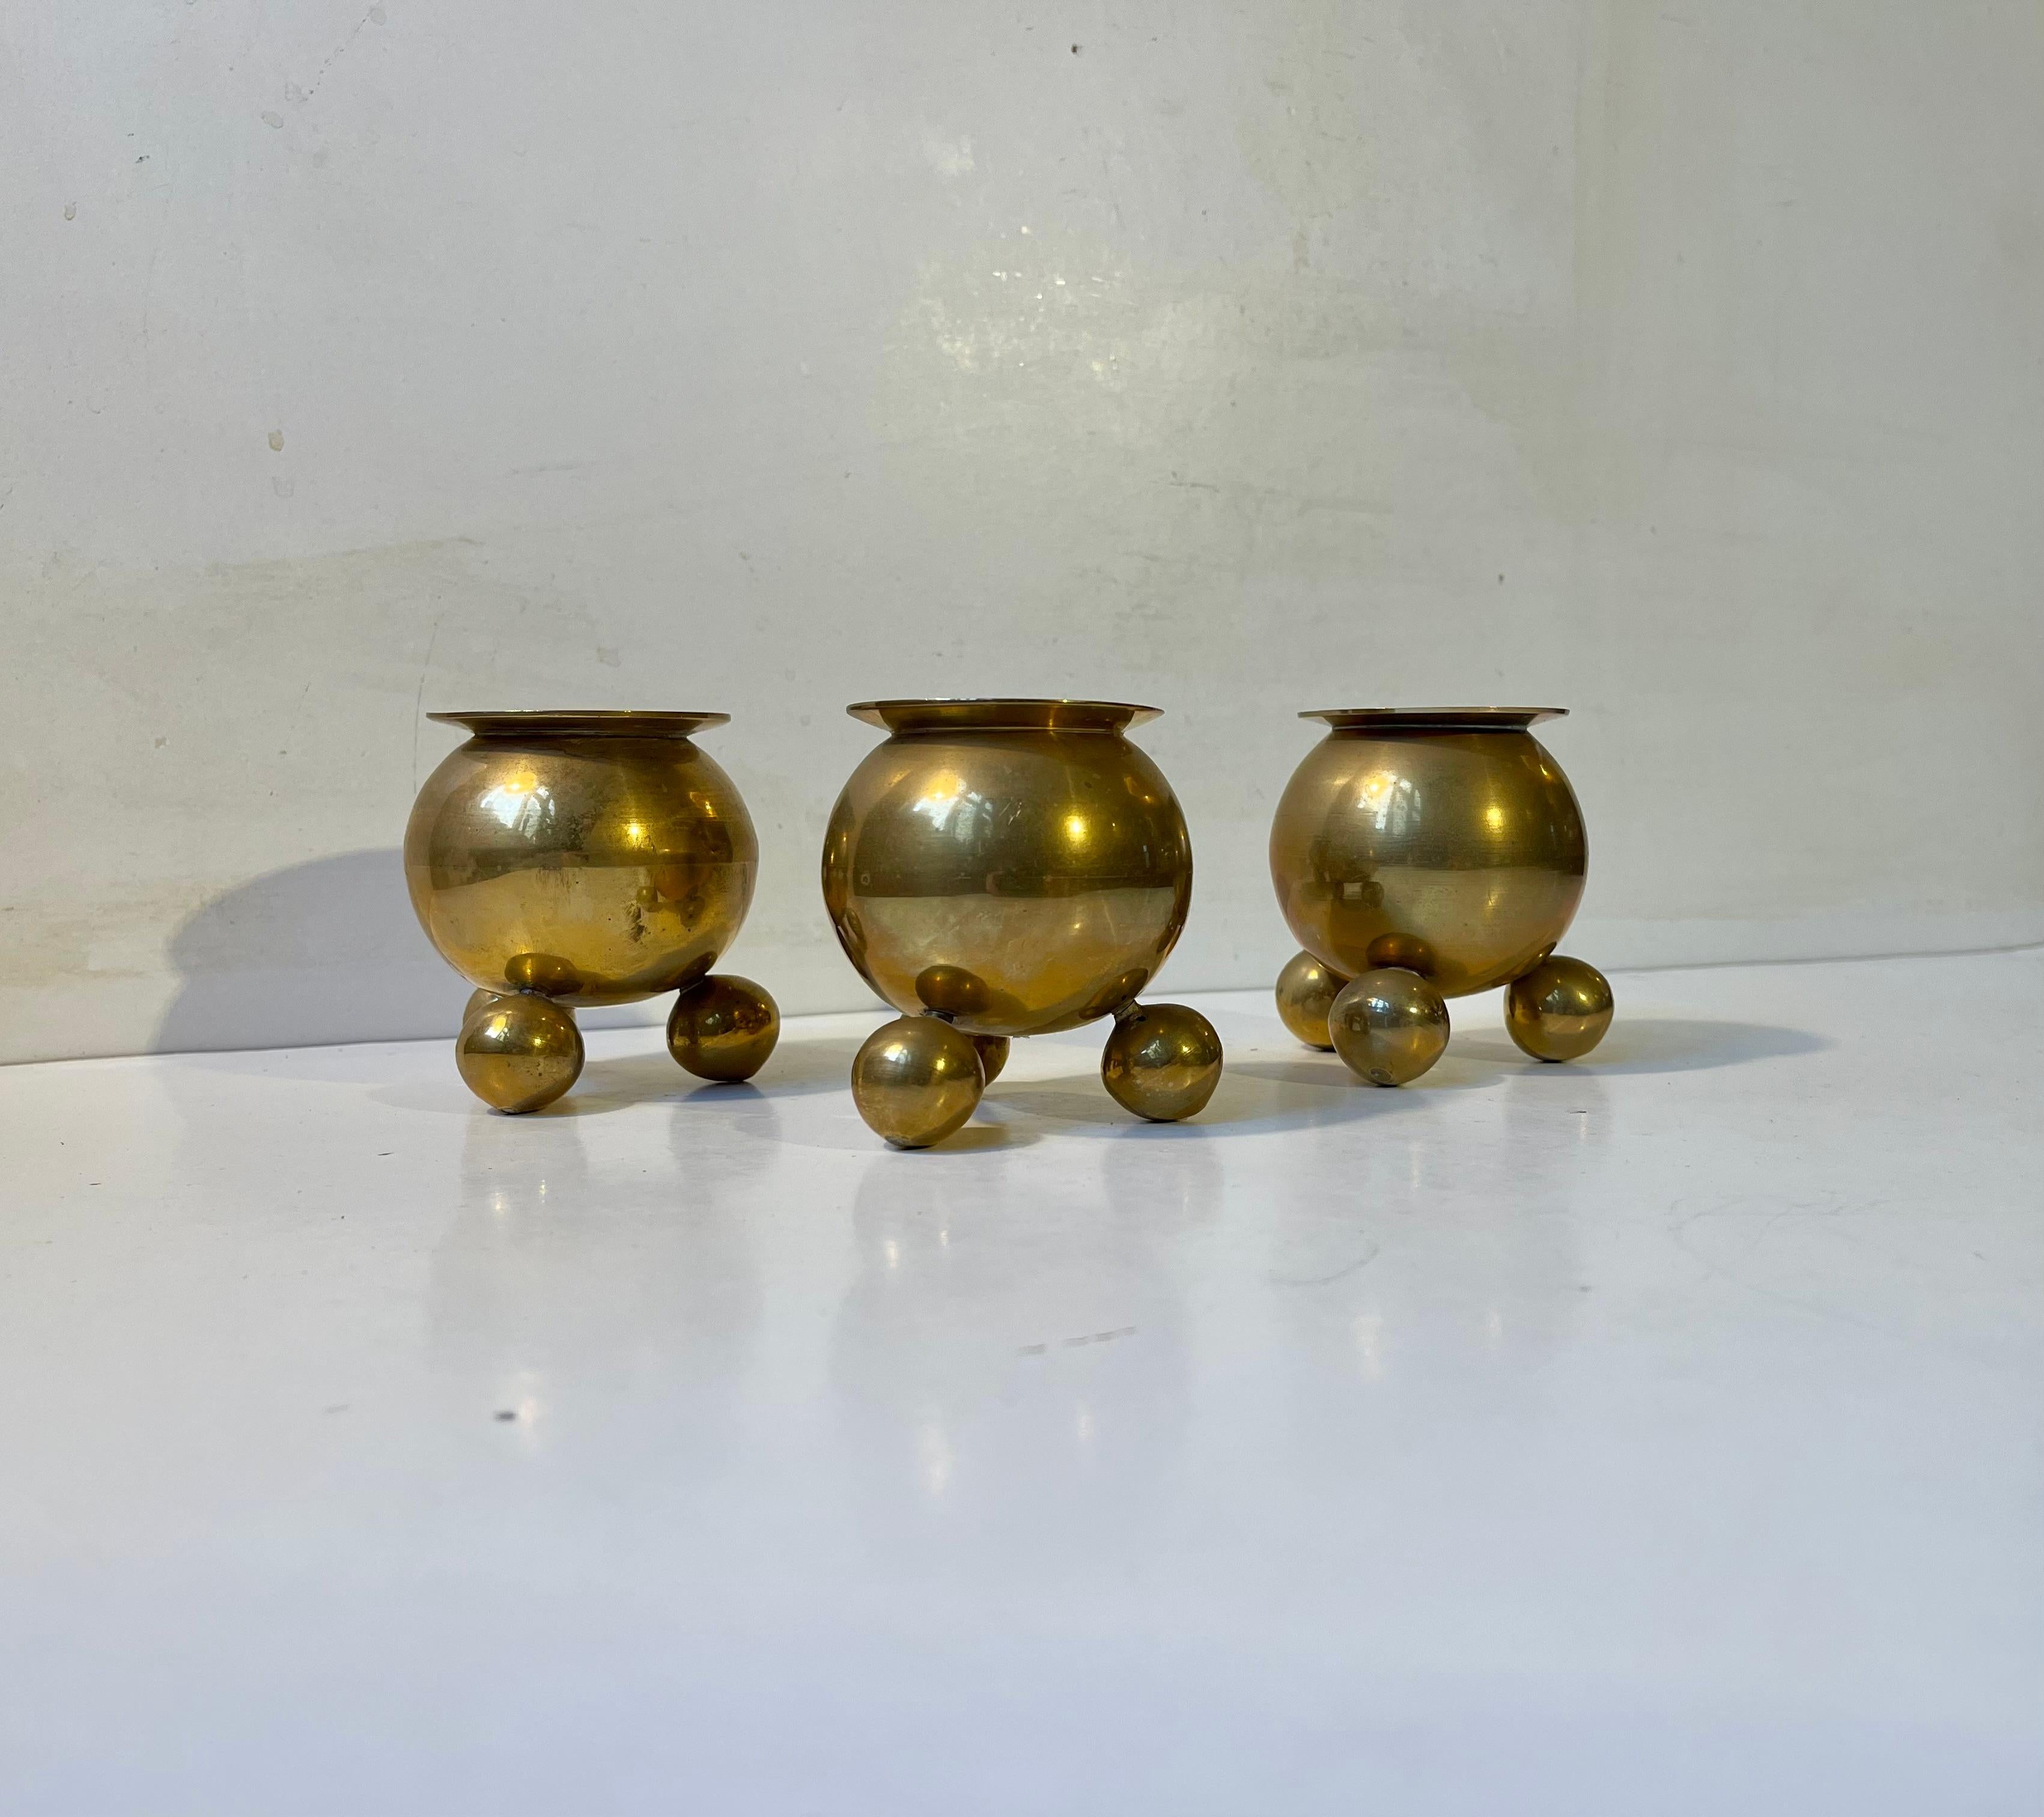 Atomic space age candleholders in the shape of cauldrons. They are made from brass during the 1950s Scandinavia and feature patina from the spand of time. They are to be fitted with regular sized candles. The Candles in the photos are not included.